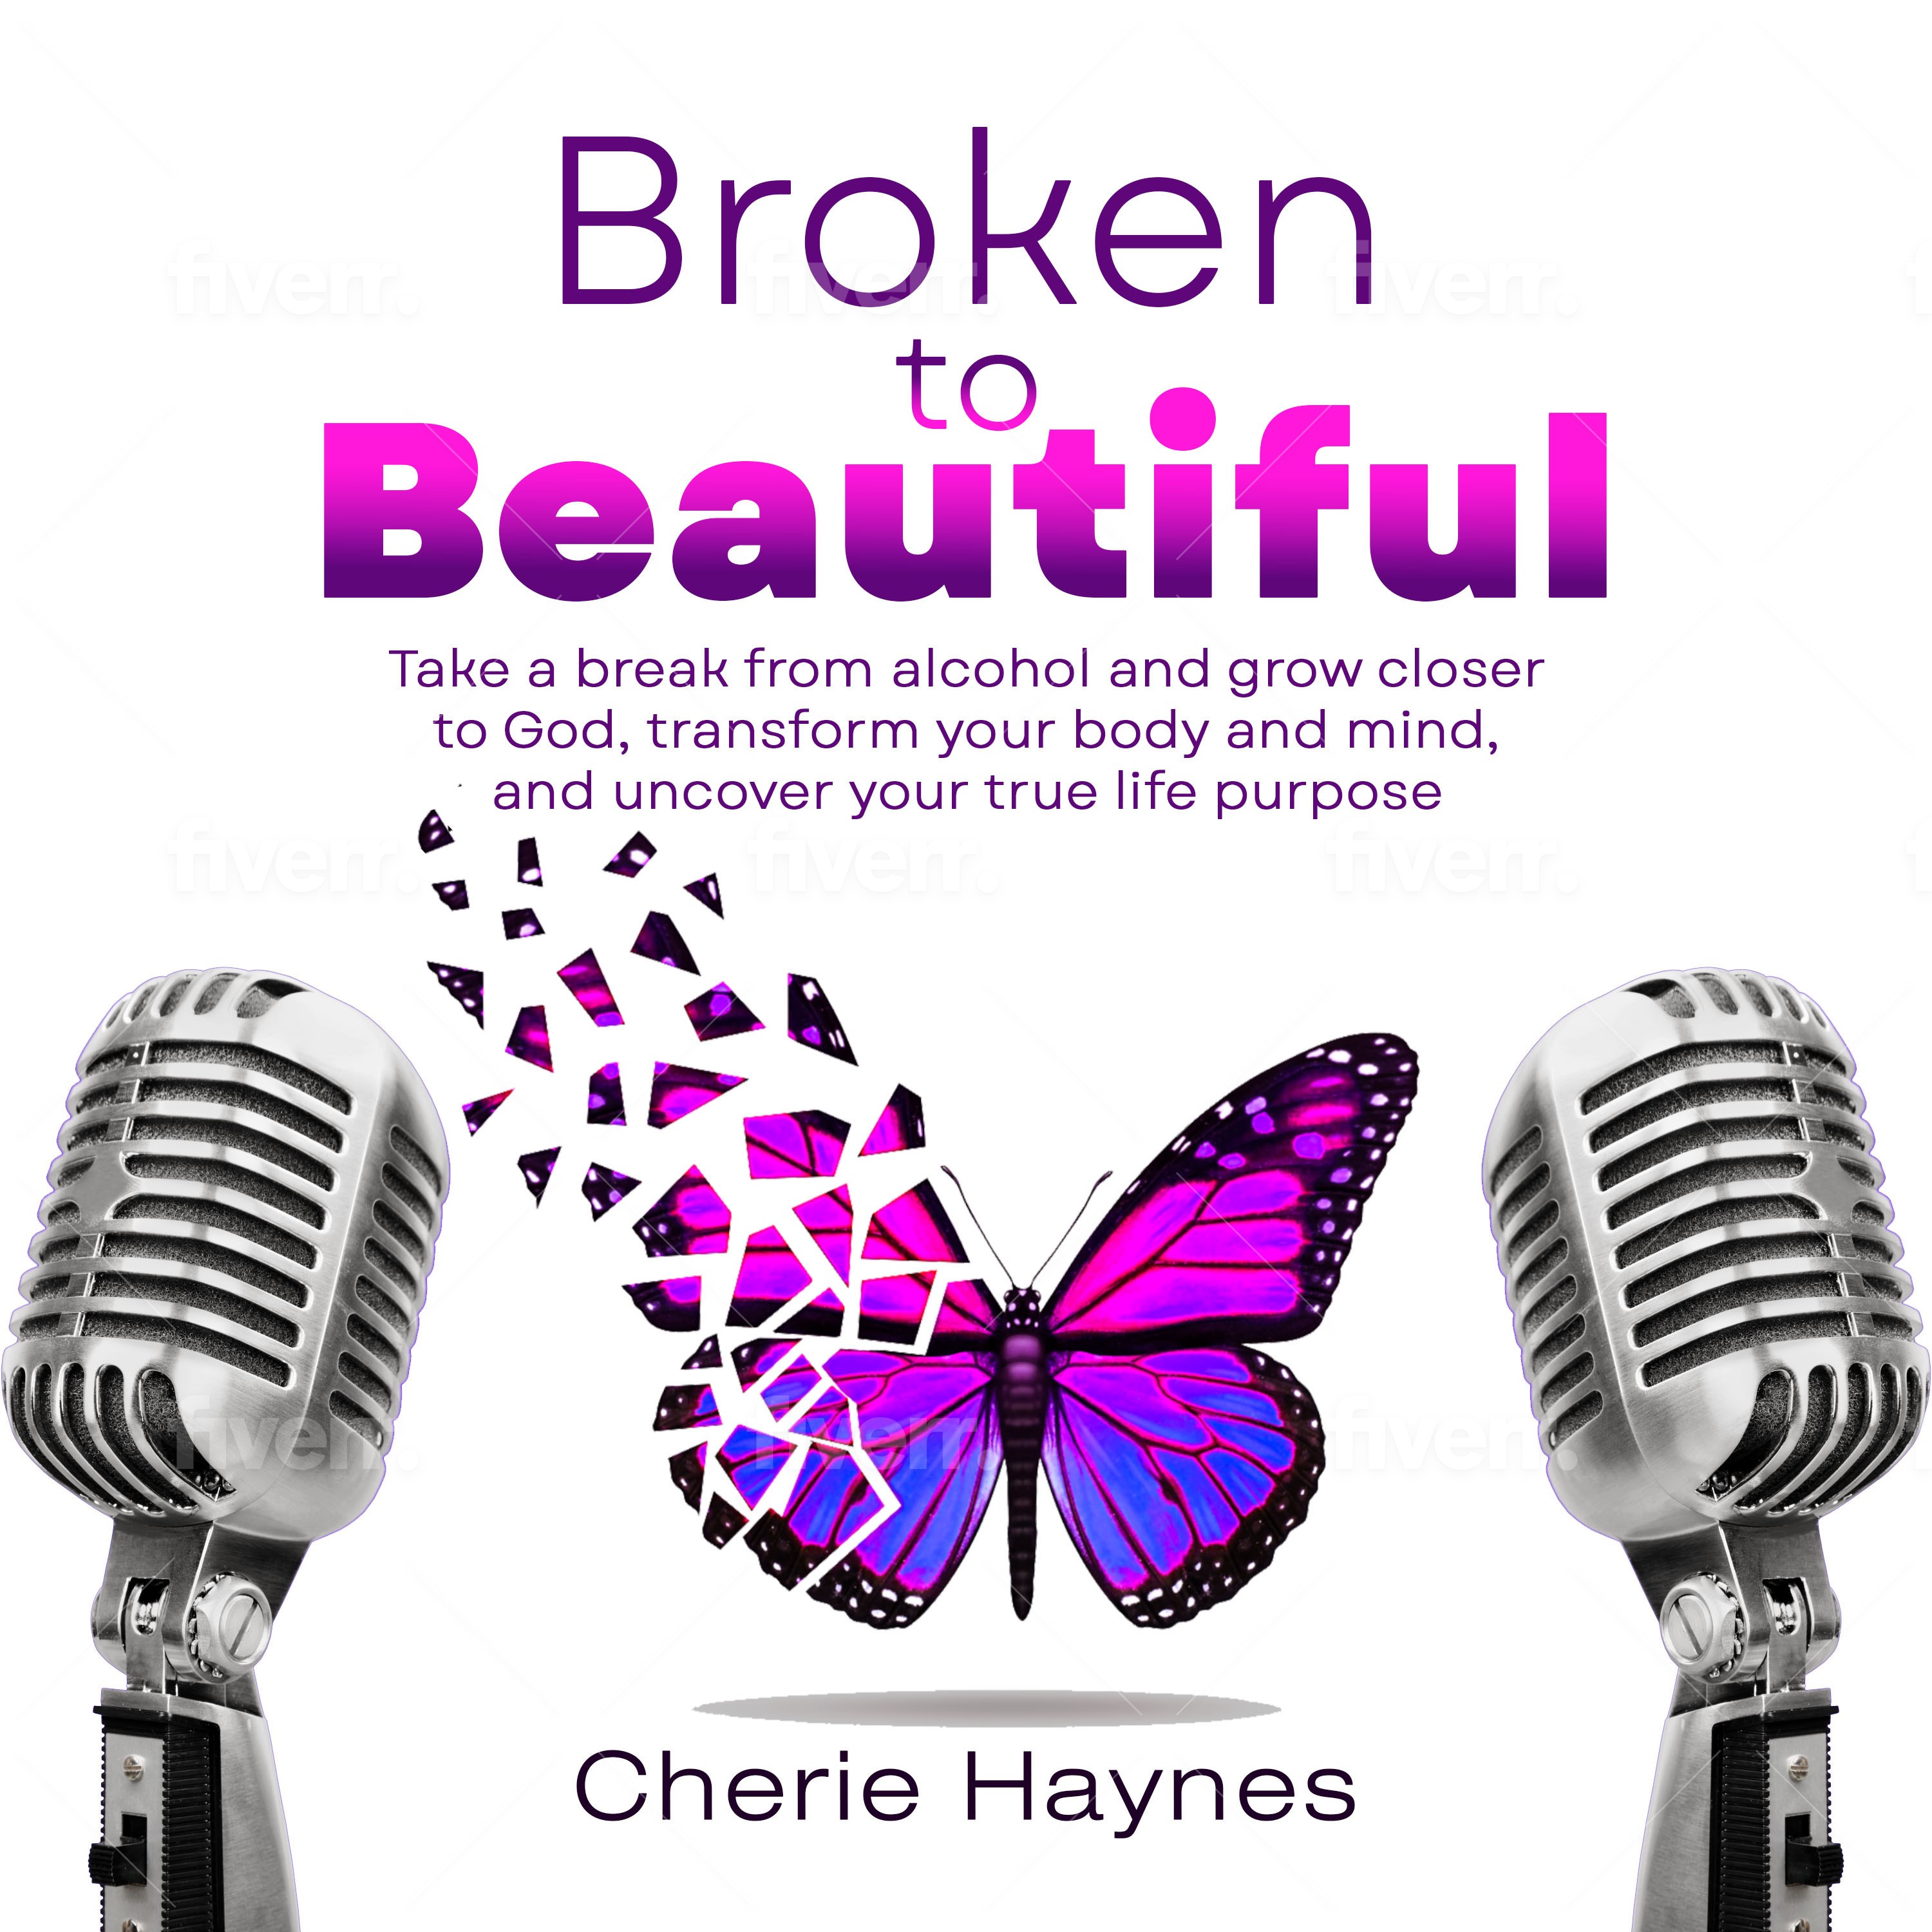 Broken to Beautiful; Take a Break From Alcohol and Grow Closer to God, Transform Your Body and Mind, and Uncover Your True Life Purpose